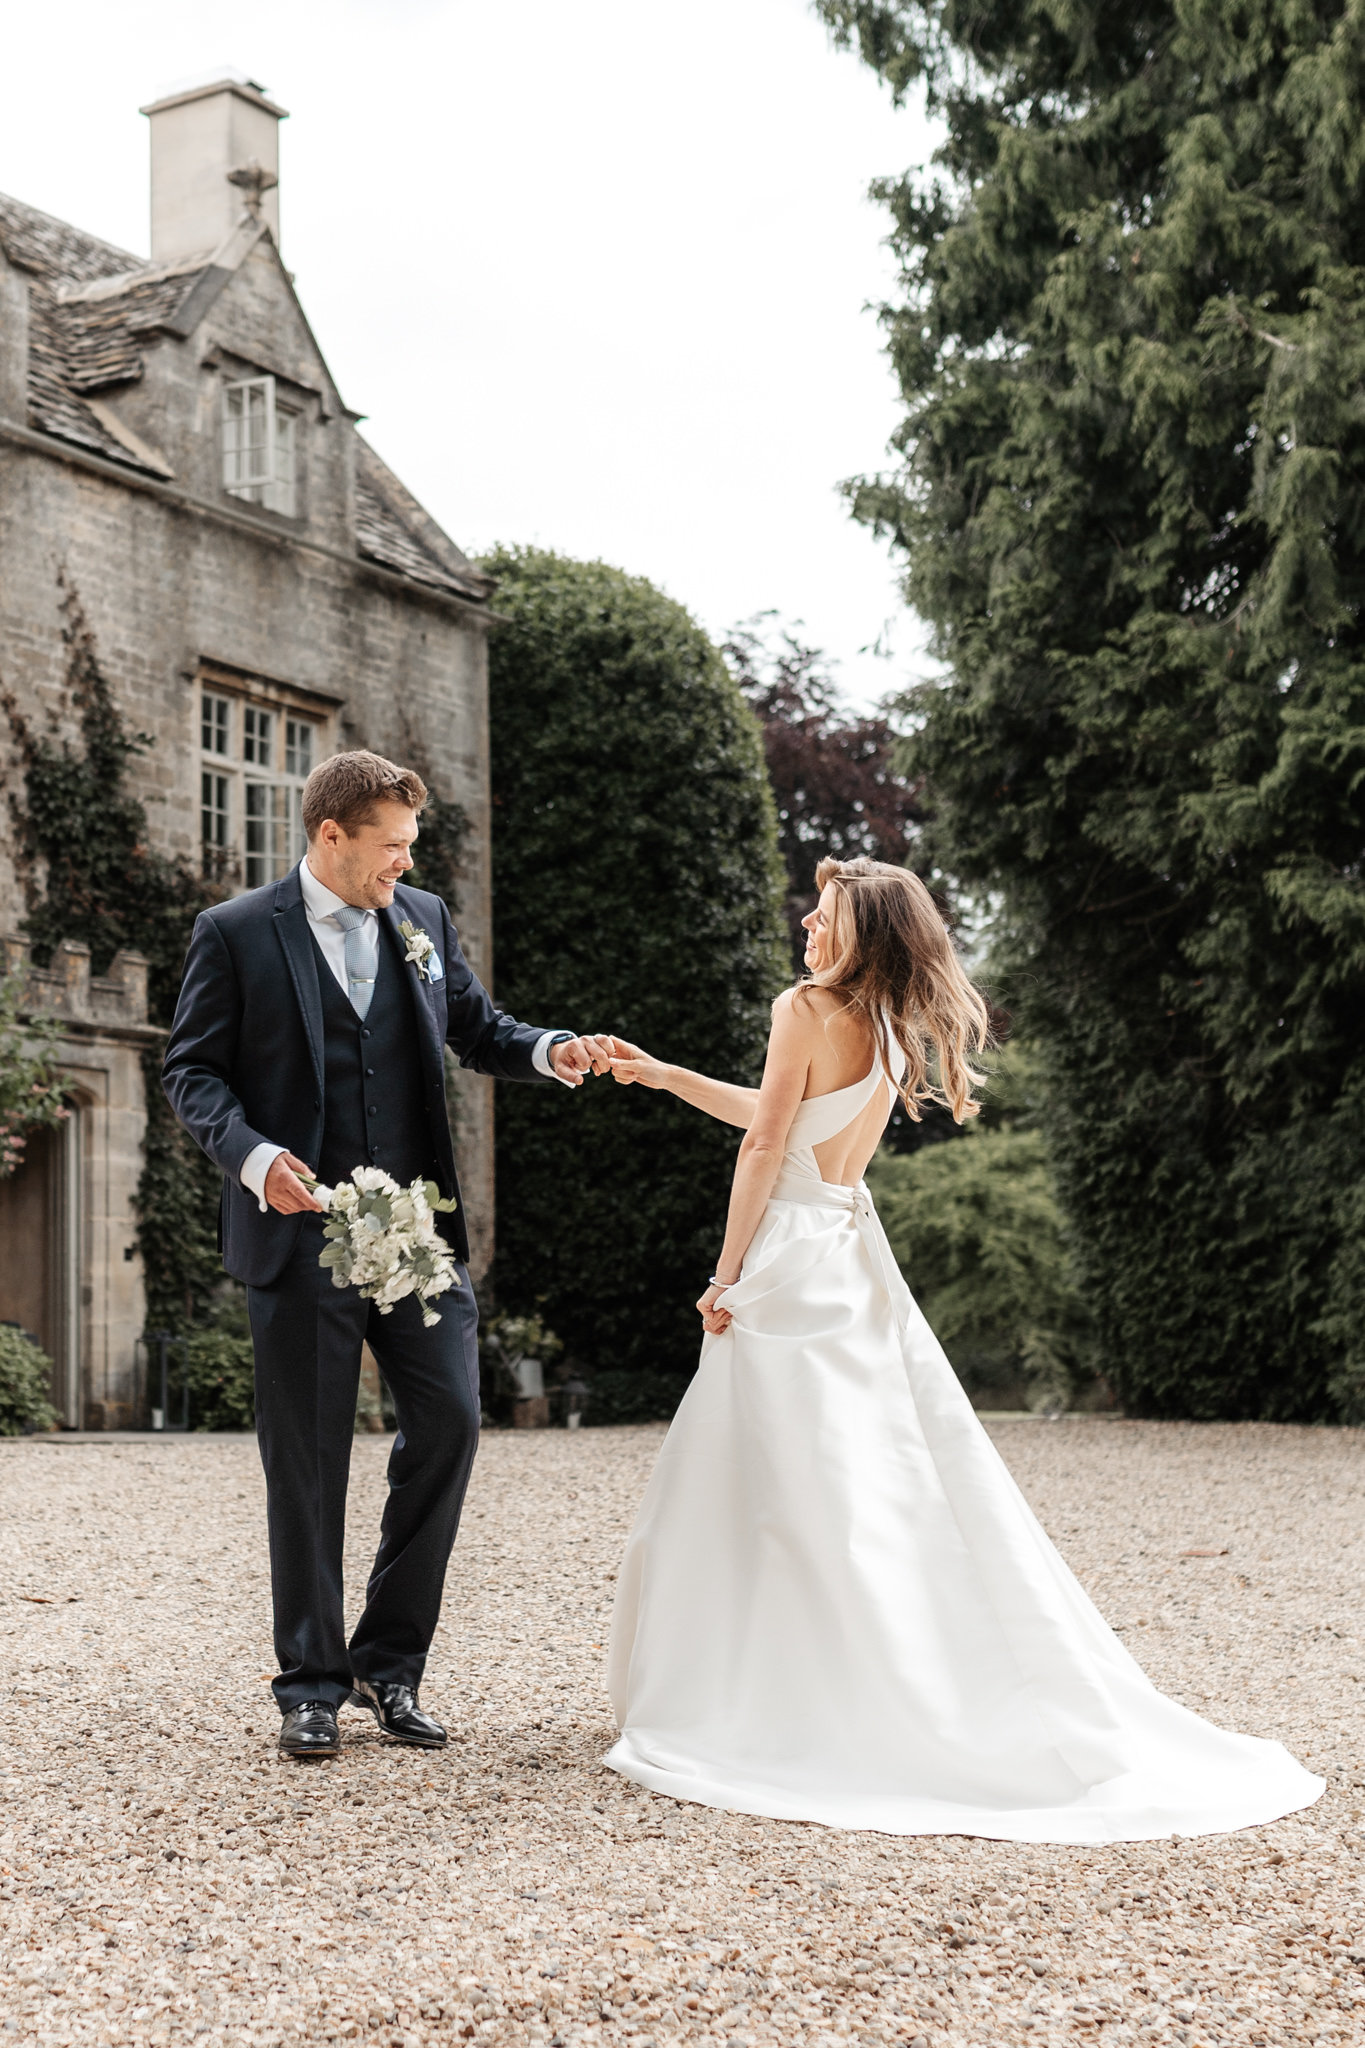 couple portrait outside their wedding venue at barnsley house